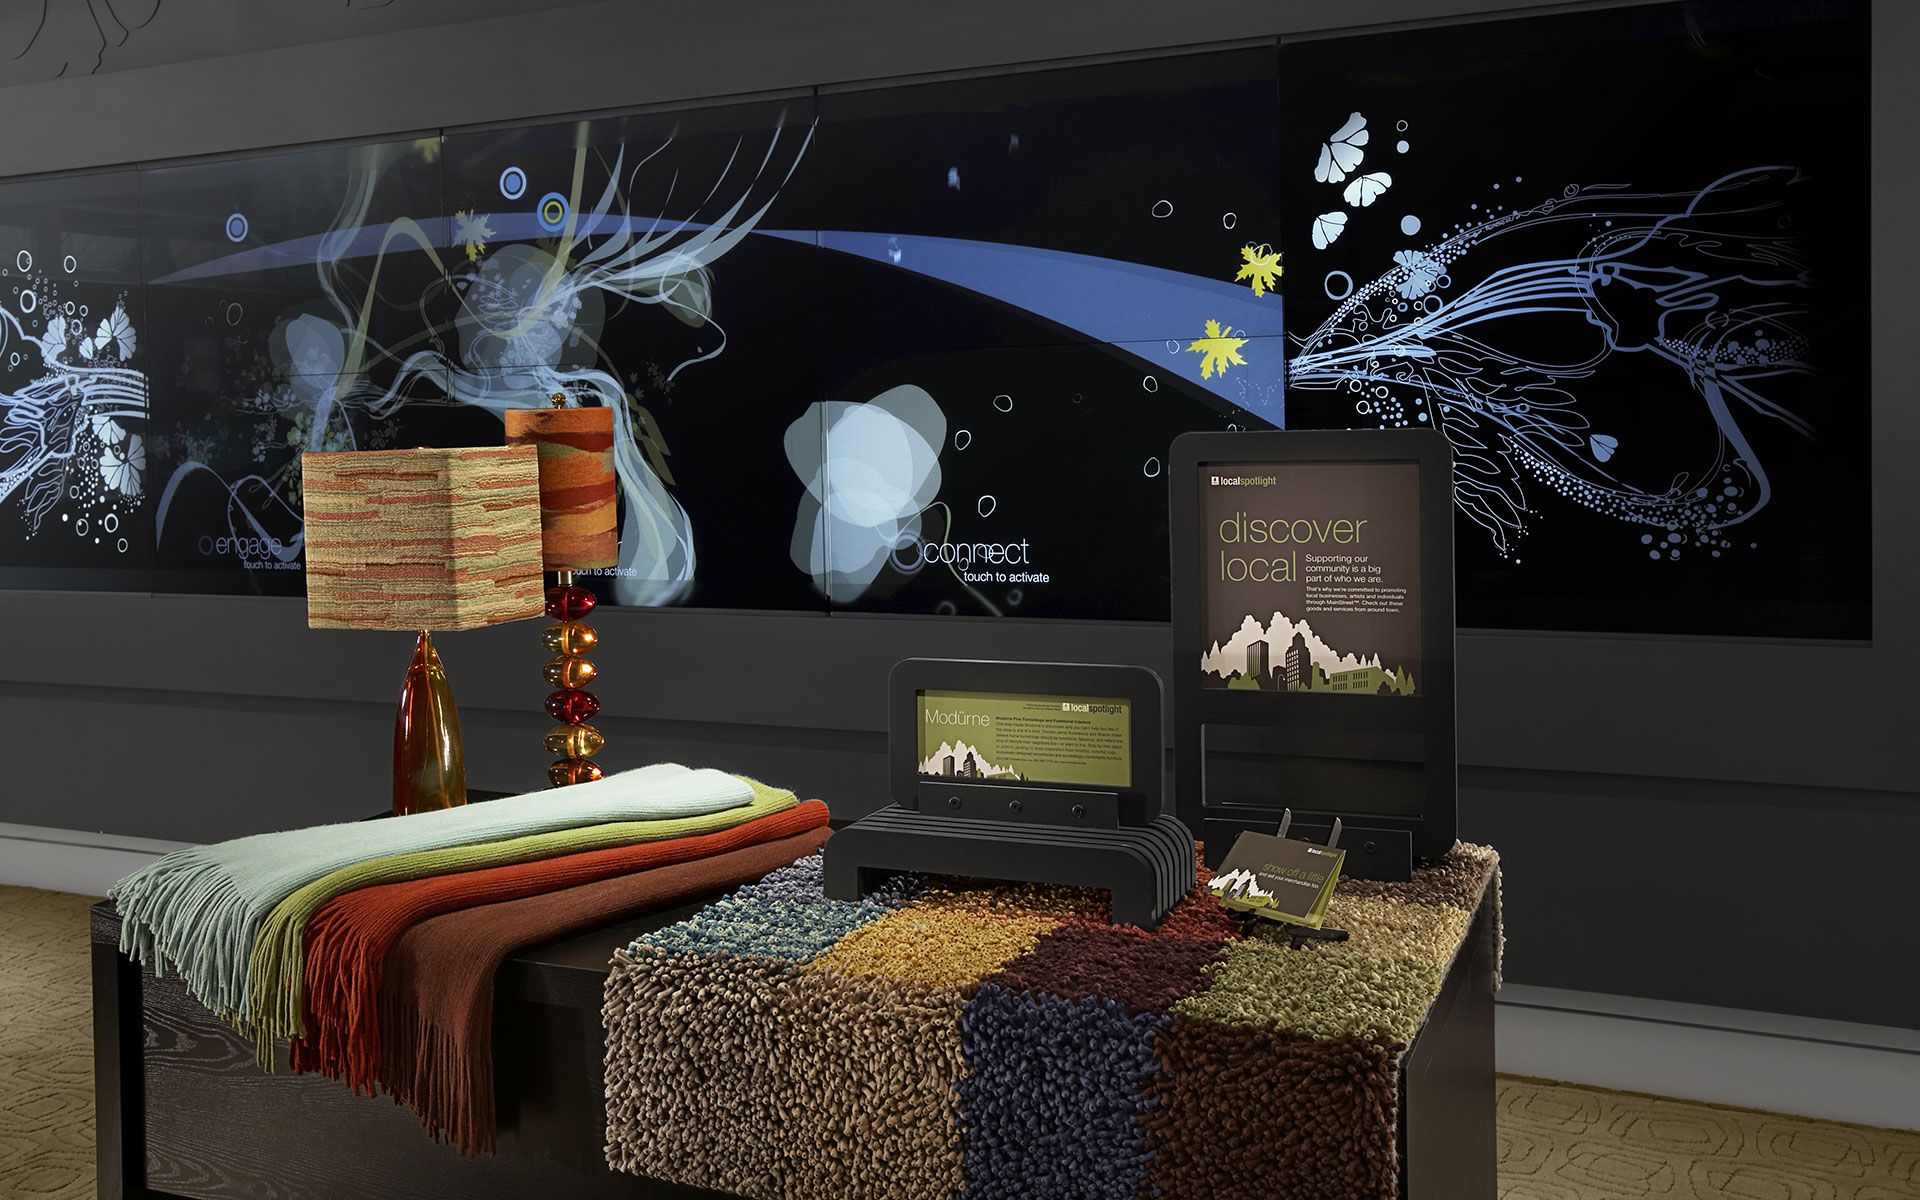 Tables with colorful rugs and lamps in front of a digital display showing animated illustrations on a touch screen